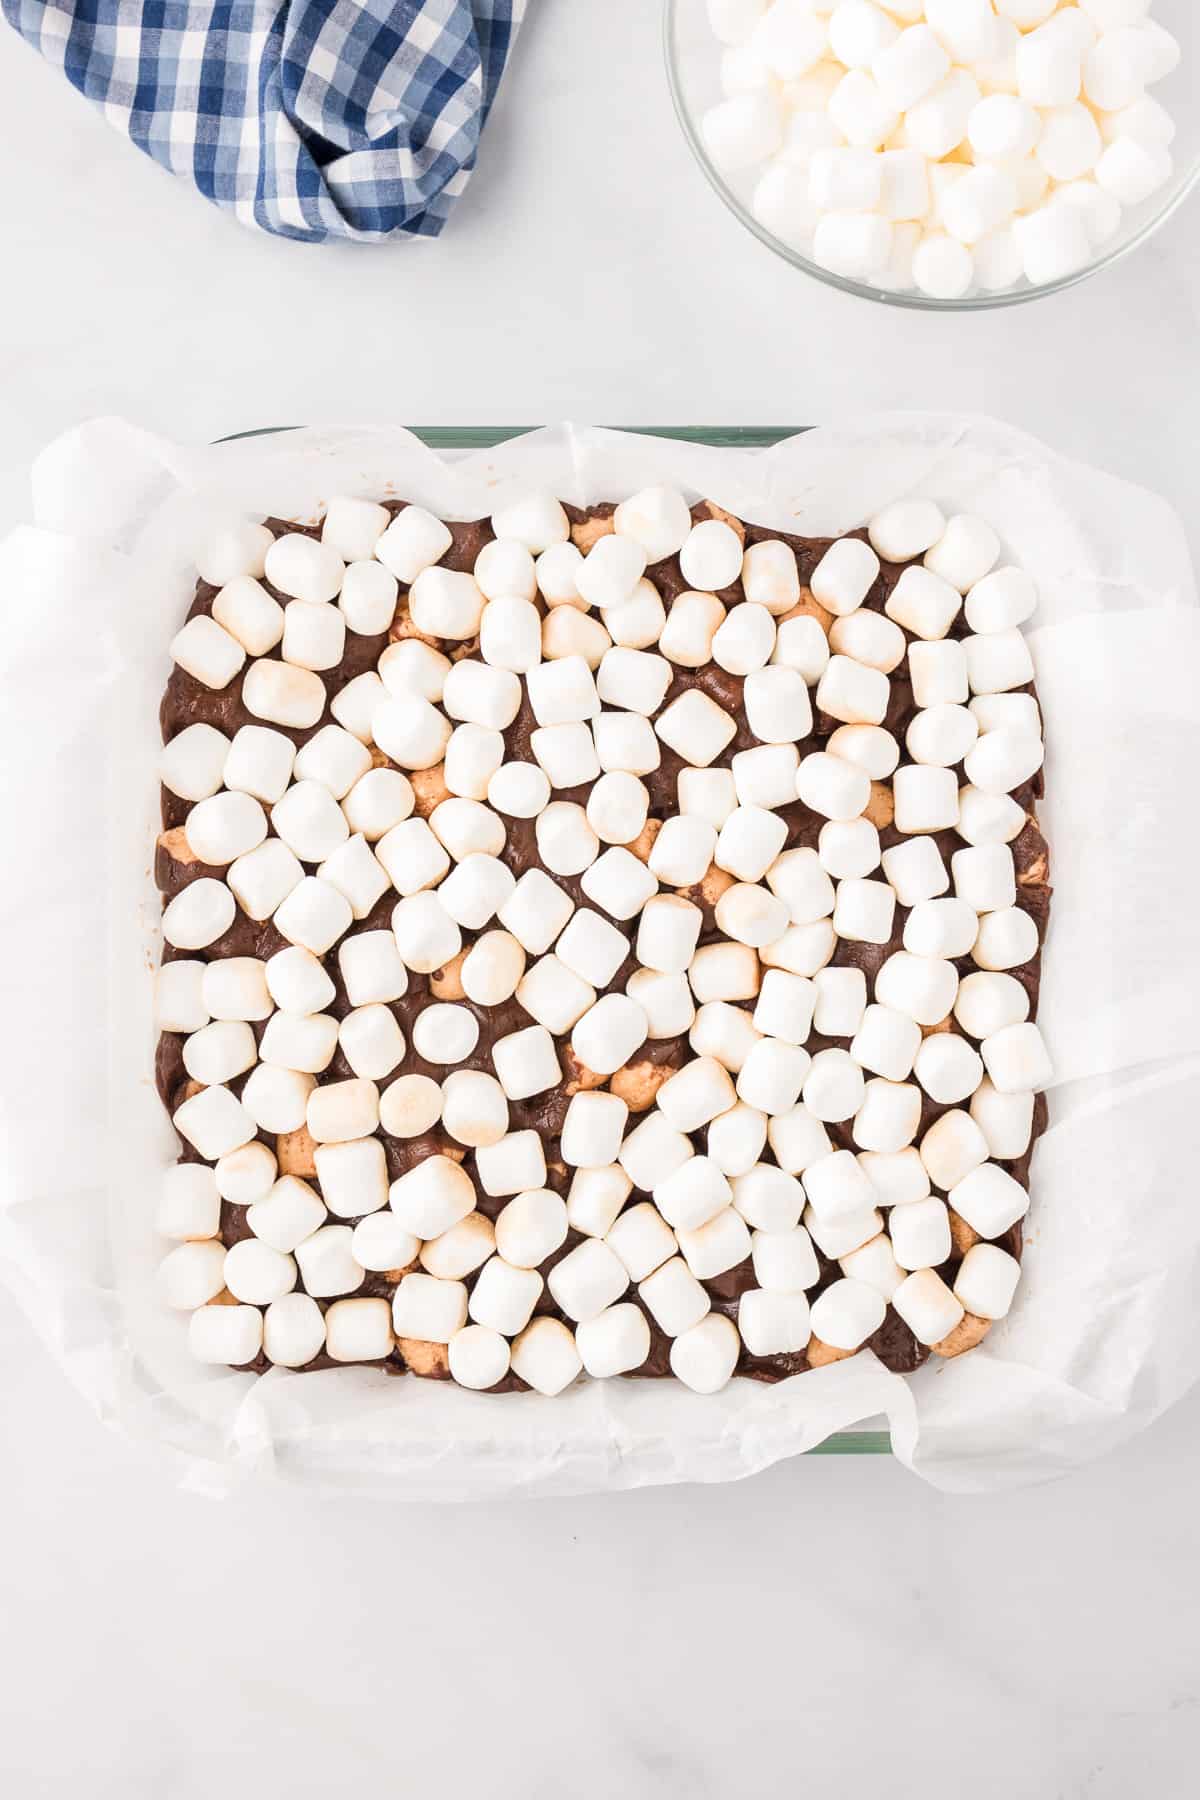 Mini marshmallows covering a pan full of hot chocolate fudge with more marshmallows in a bowl nearby.